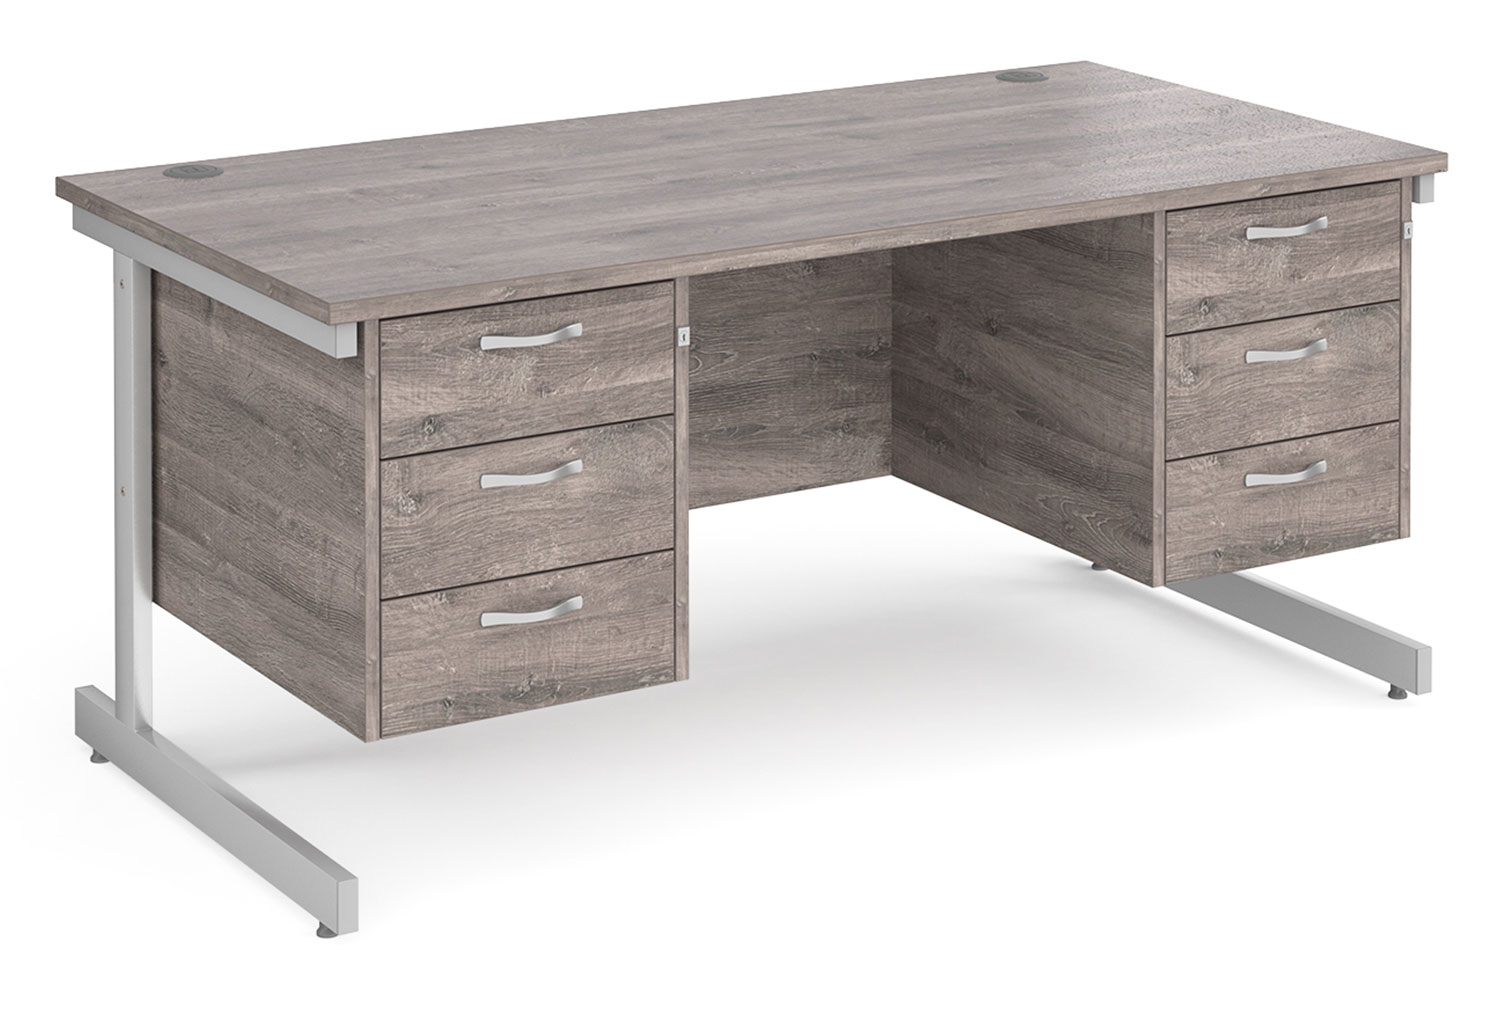 Thrifty Next-Day Rectangular Office Desk 3+3 Drawers Grey Oak, 160wx80dx73h (cm), Express Delivery